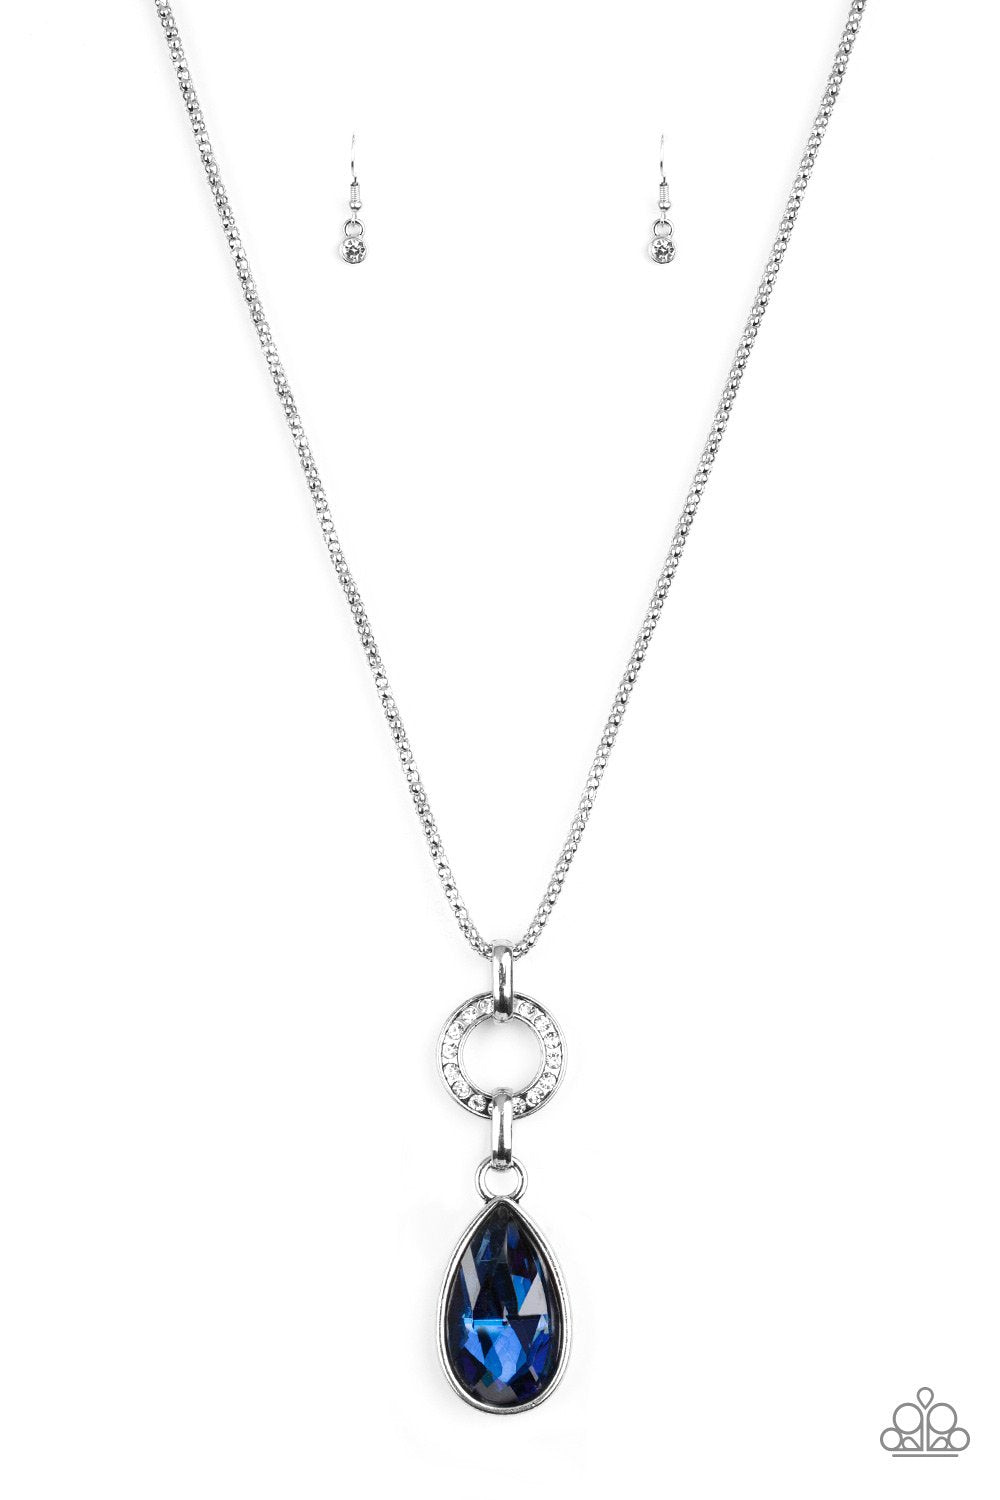 Lookin&#39; Like a Million Sapphire Blue Teardrop Necklace and matching Earrings - Paparazzi Accessories-CarasShop.com - $5 Jewelry by Cara Jewels